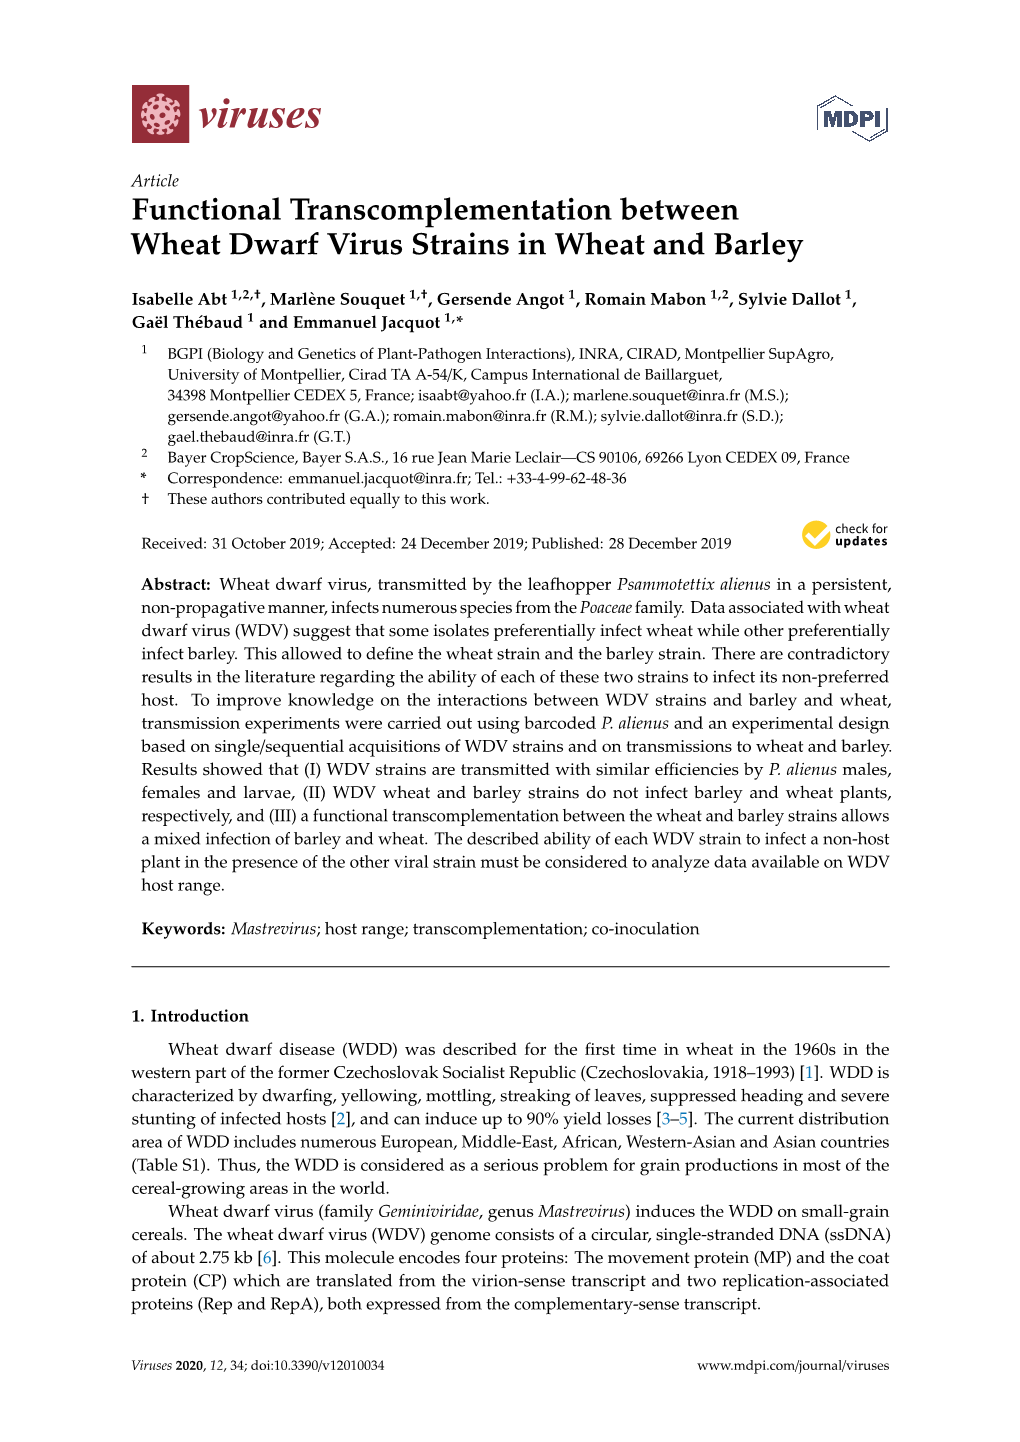 Functional Transcomplementation Between Wheat Dwarf Virus Strains in Wheat and Barley